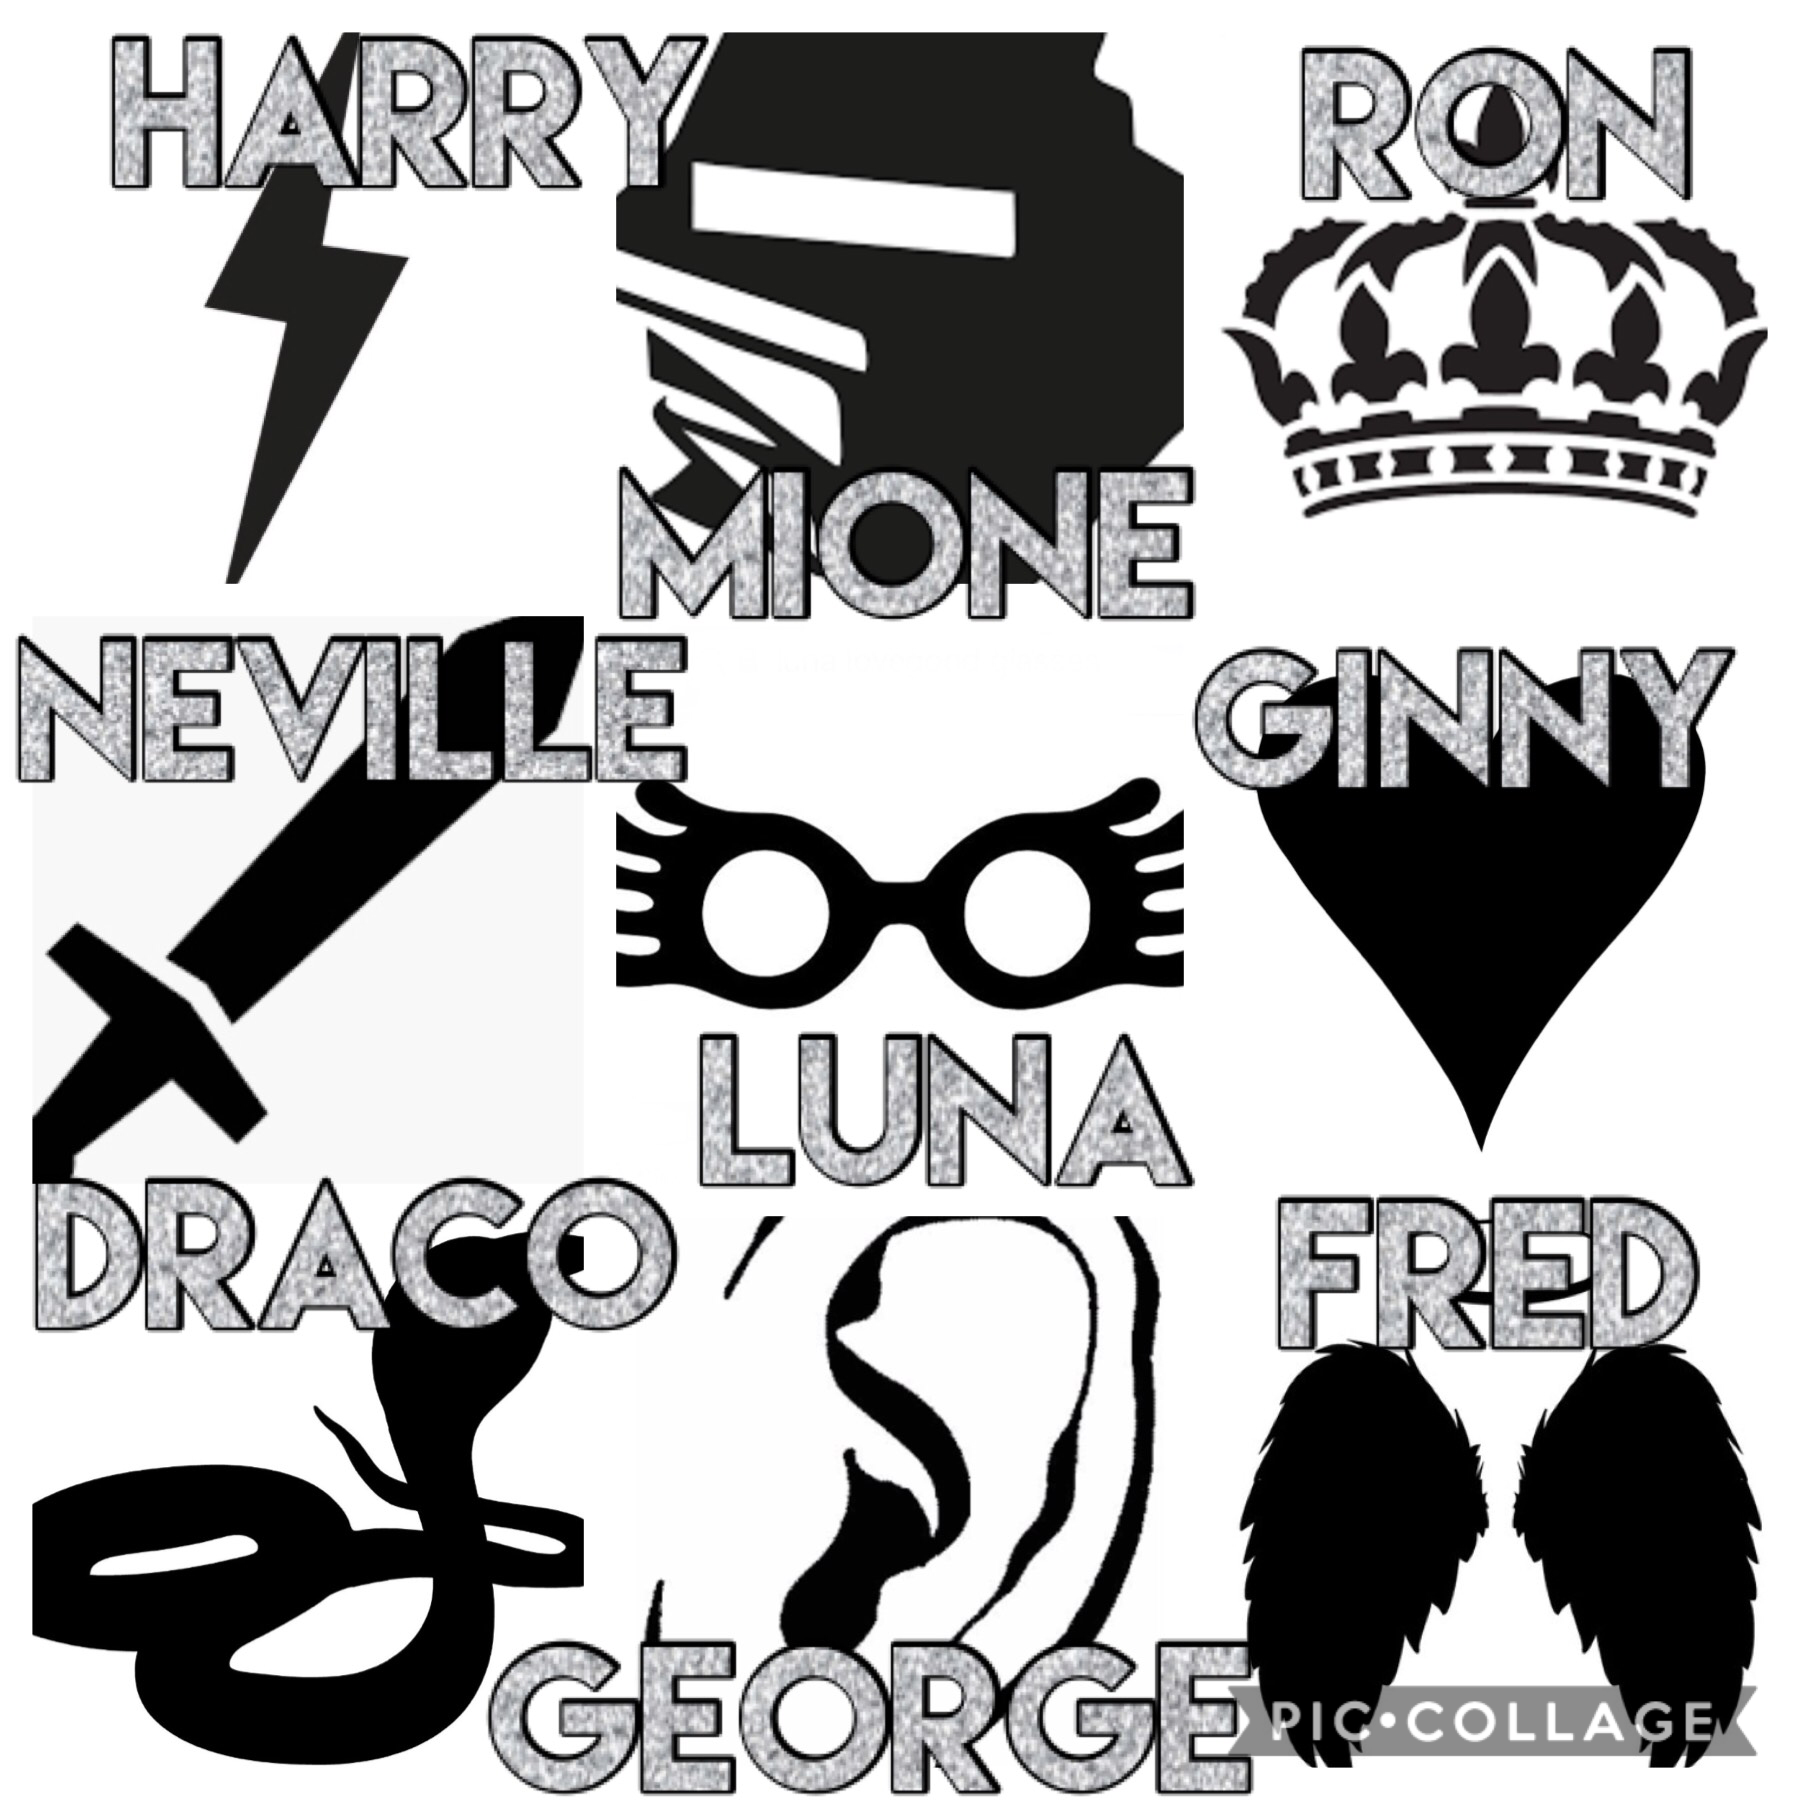 Rip Fred!!😭😭😭😭😭😭😭
Sure I’m a Slytherin and hate Ron cause I ship dramione, but that doesn’t mean I didn’t cry when Fred died. 😭😭😭😭😭😭😭